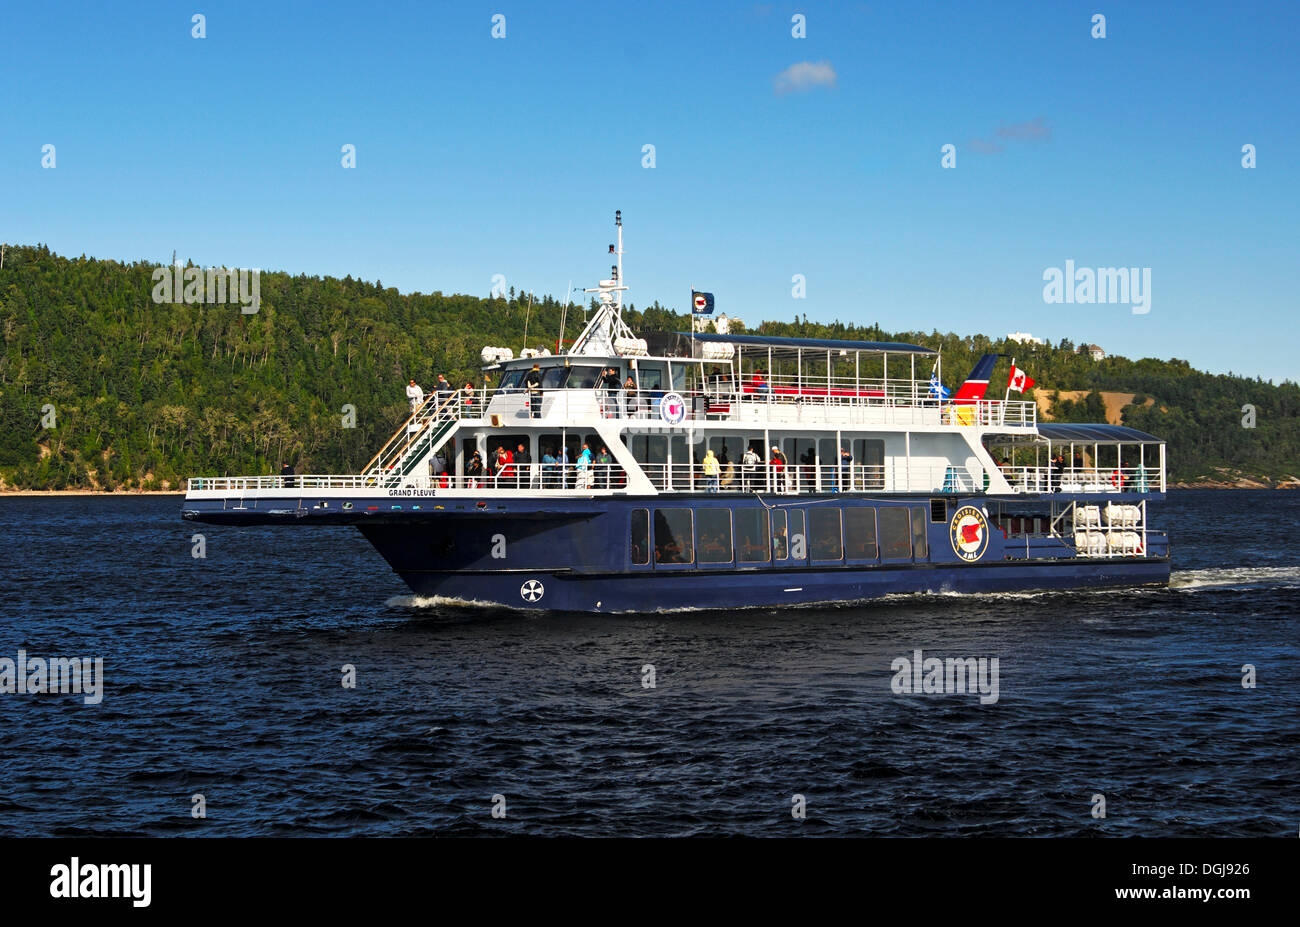 Cruise ship of the Croisières AML company, watching whales on the St. Lawrence River, Tadoussac, Canada Stock Photo